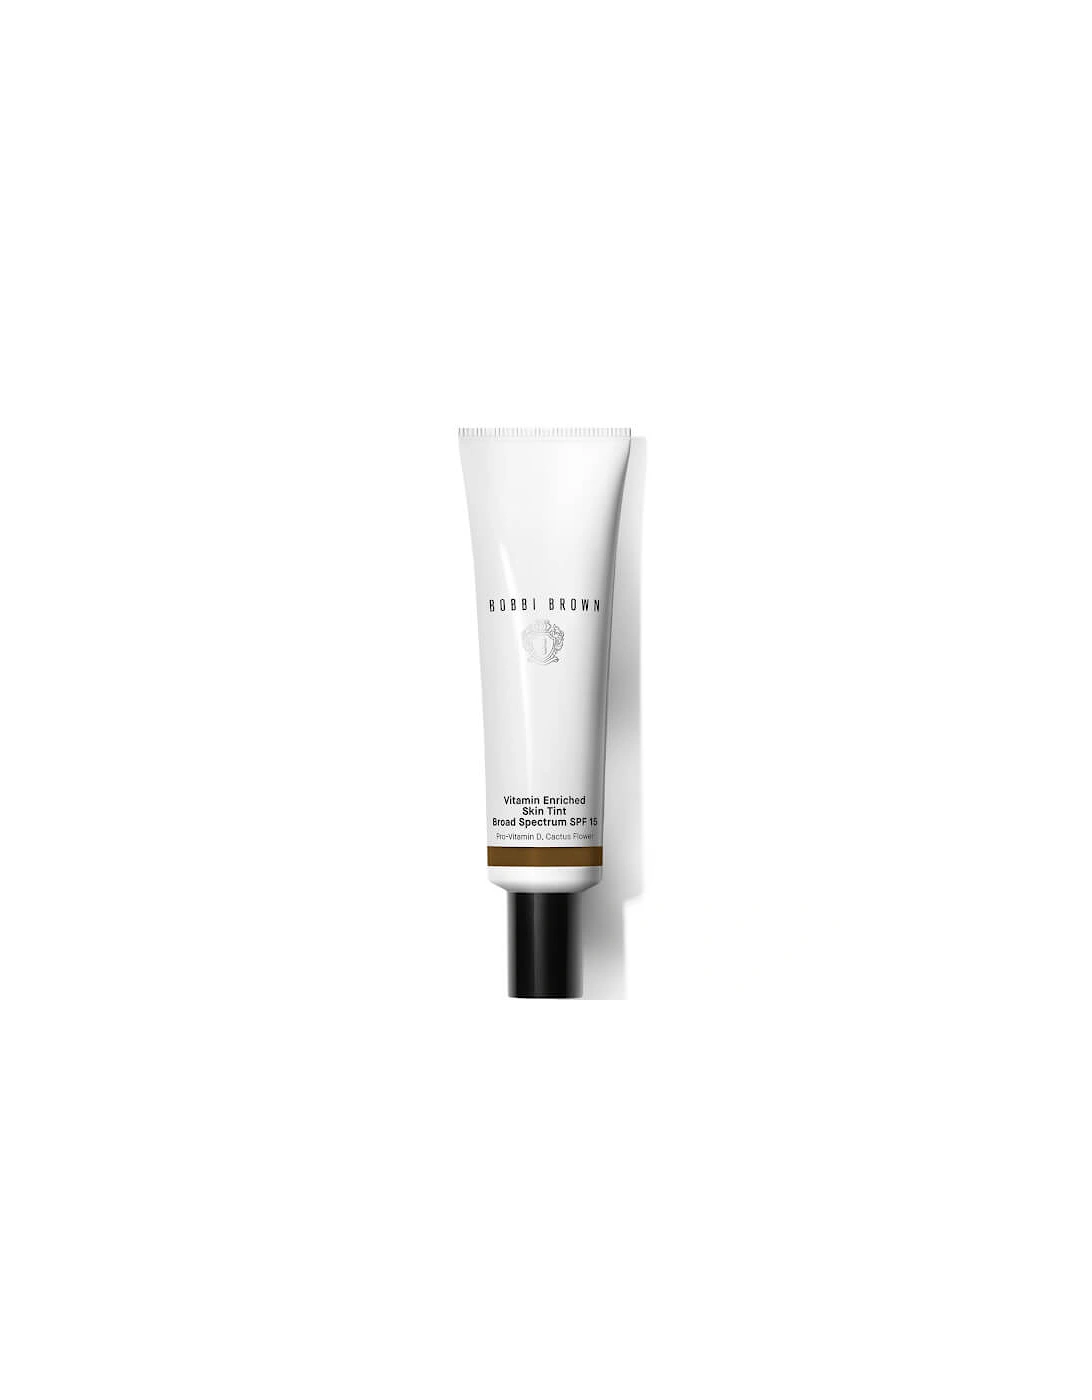 Vitamin Enriched Skin Tint - Rich 1, 2 of 1